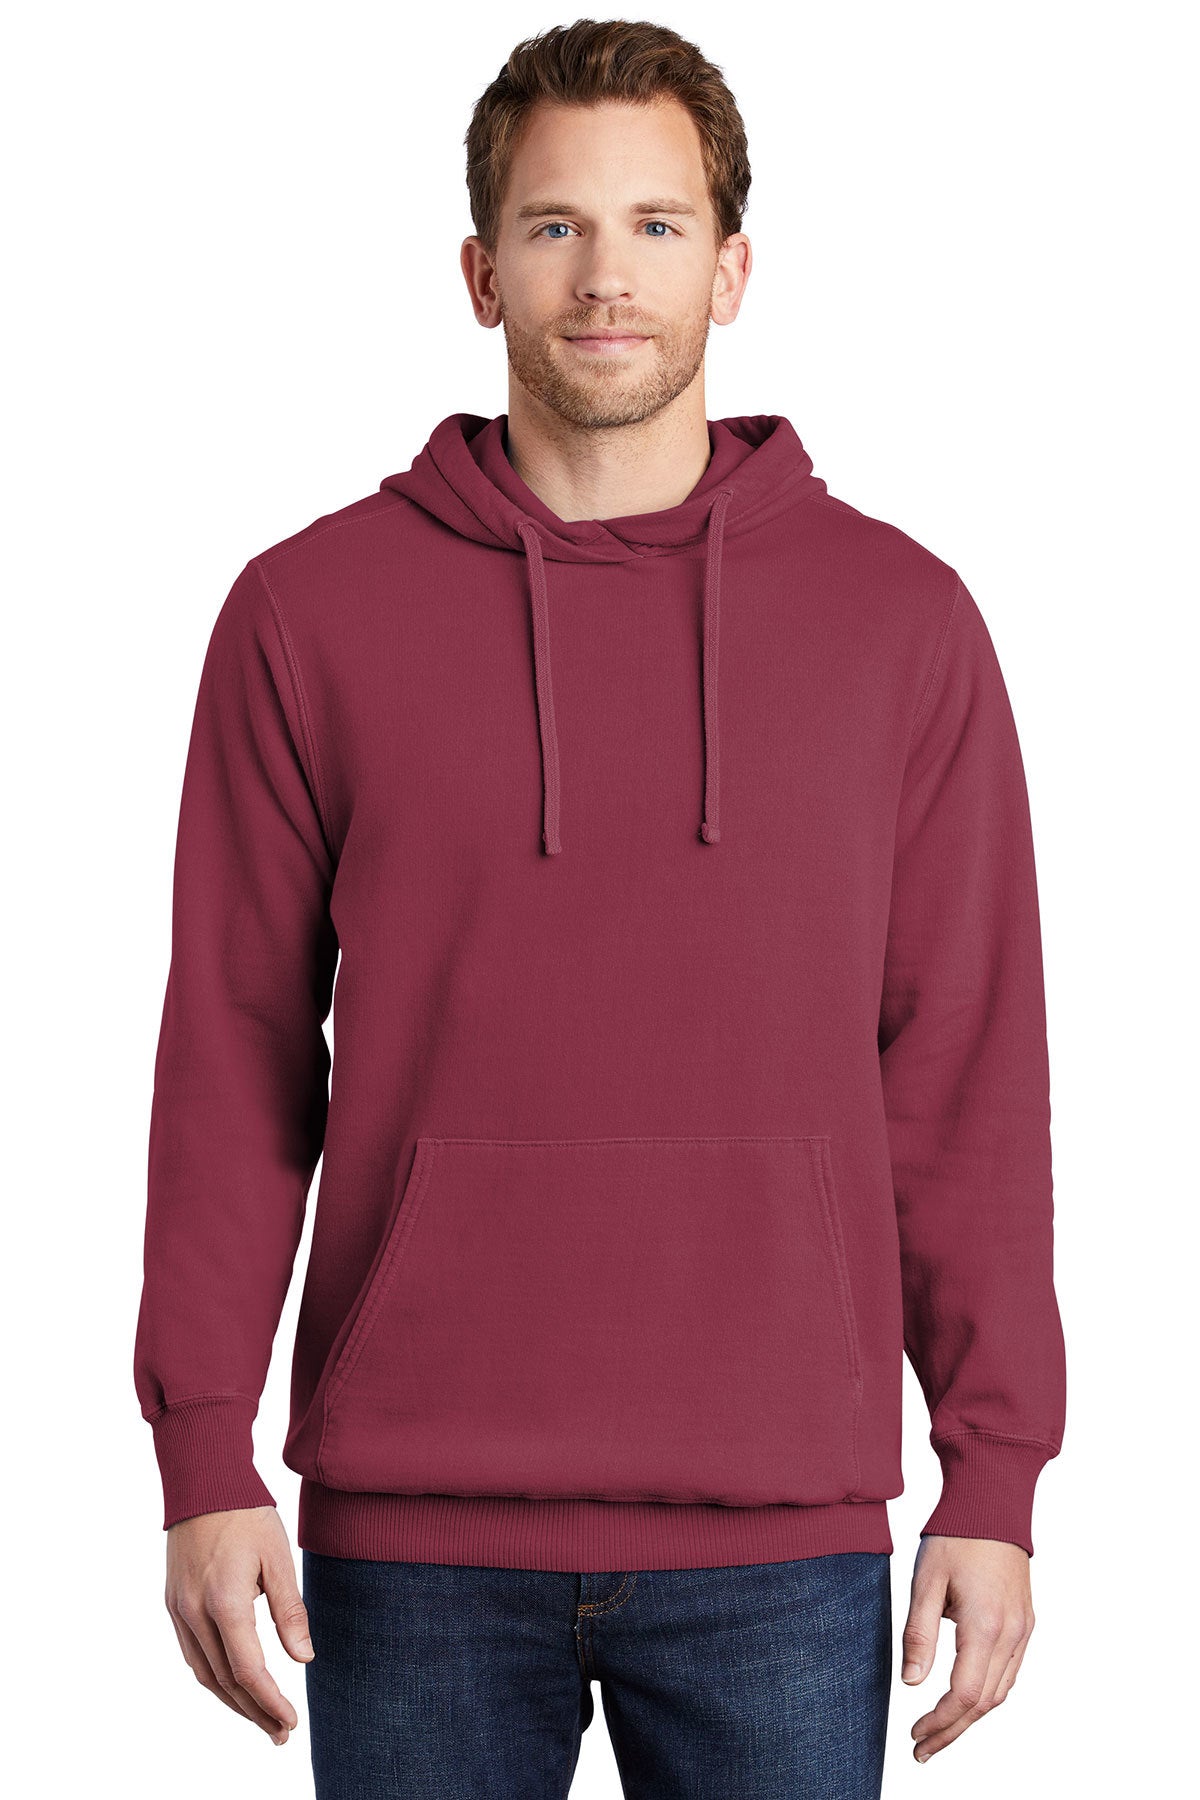 Unisex Port & Company® Beach Wash® Garment-Dyed Pullover Hooded Sweats ...